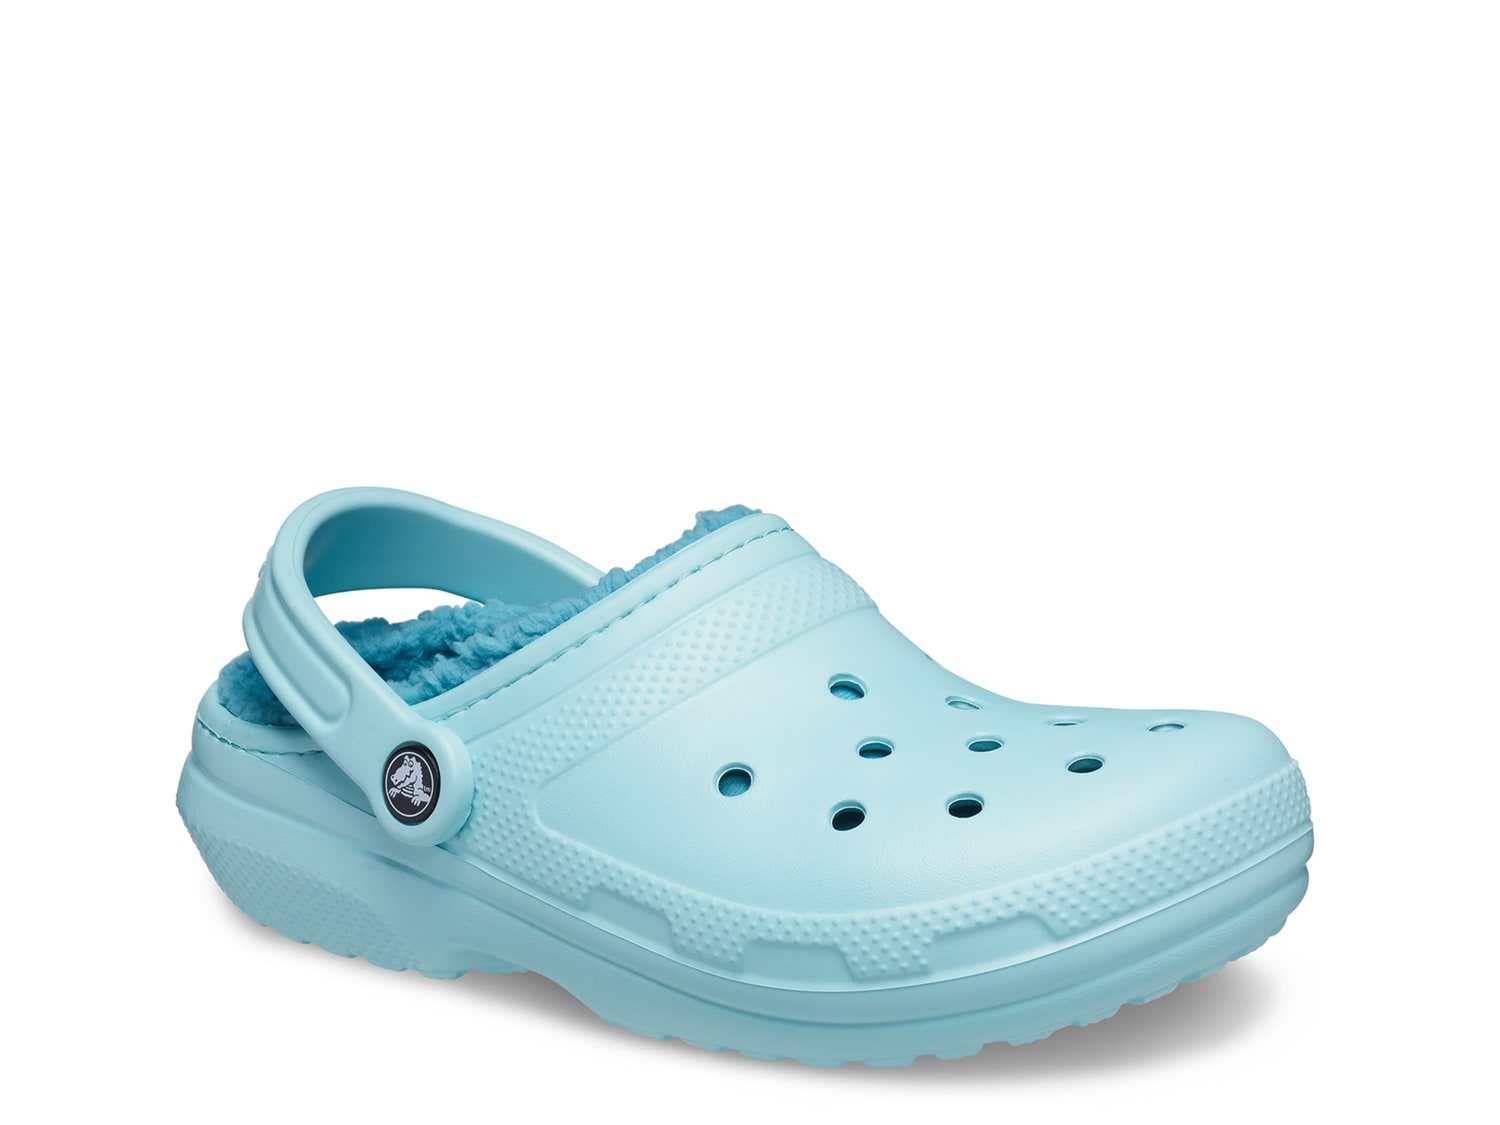 Crocs Classic Lined Clog - Free Shipping | DSW